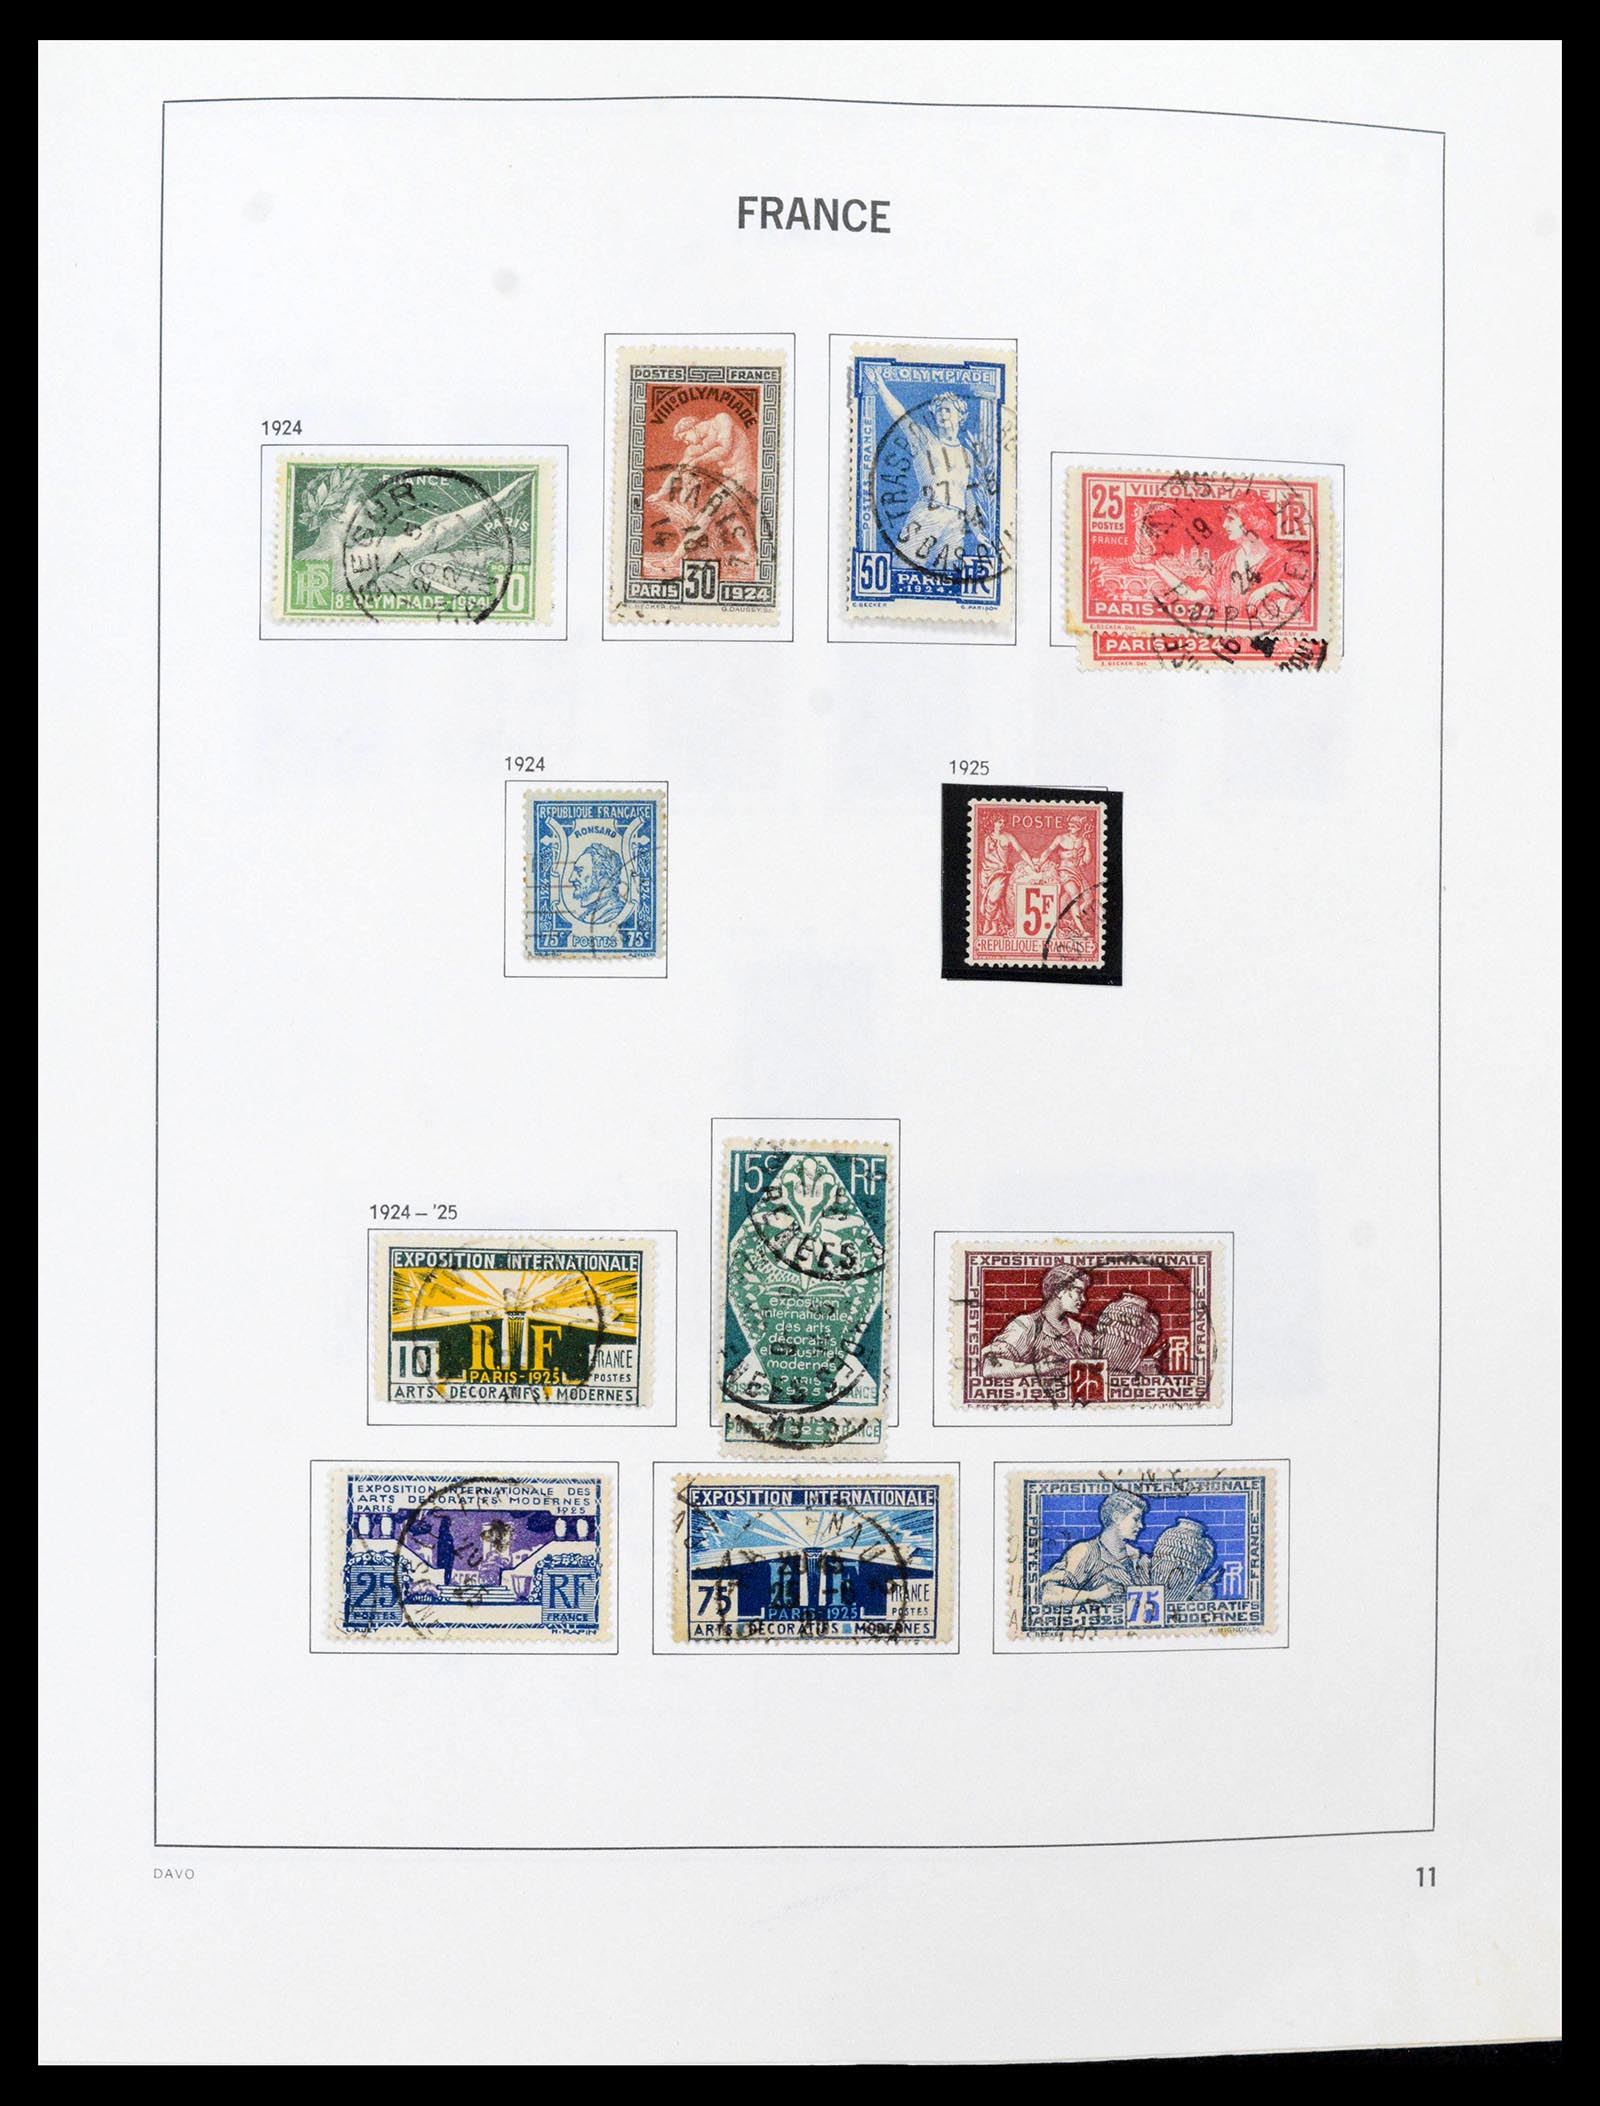 39164 0011 - Stamp collection 39164 France 1849-1981.